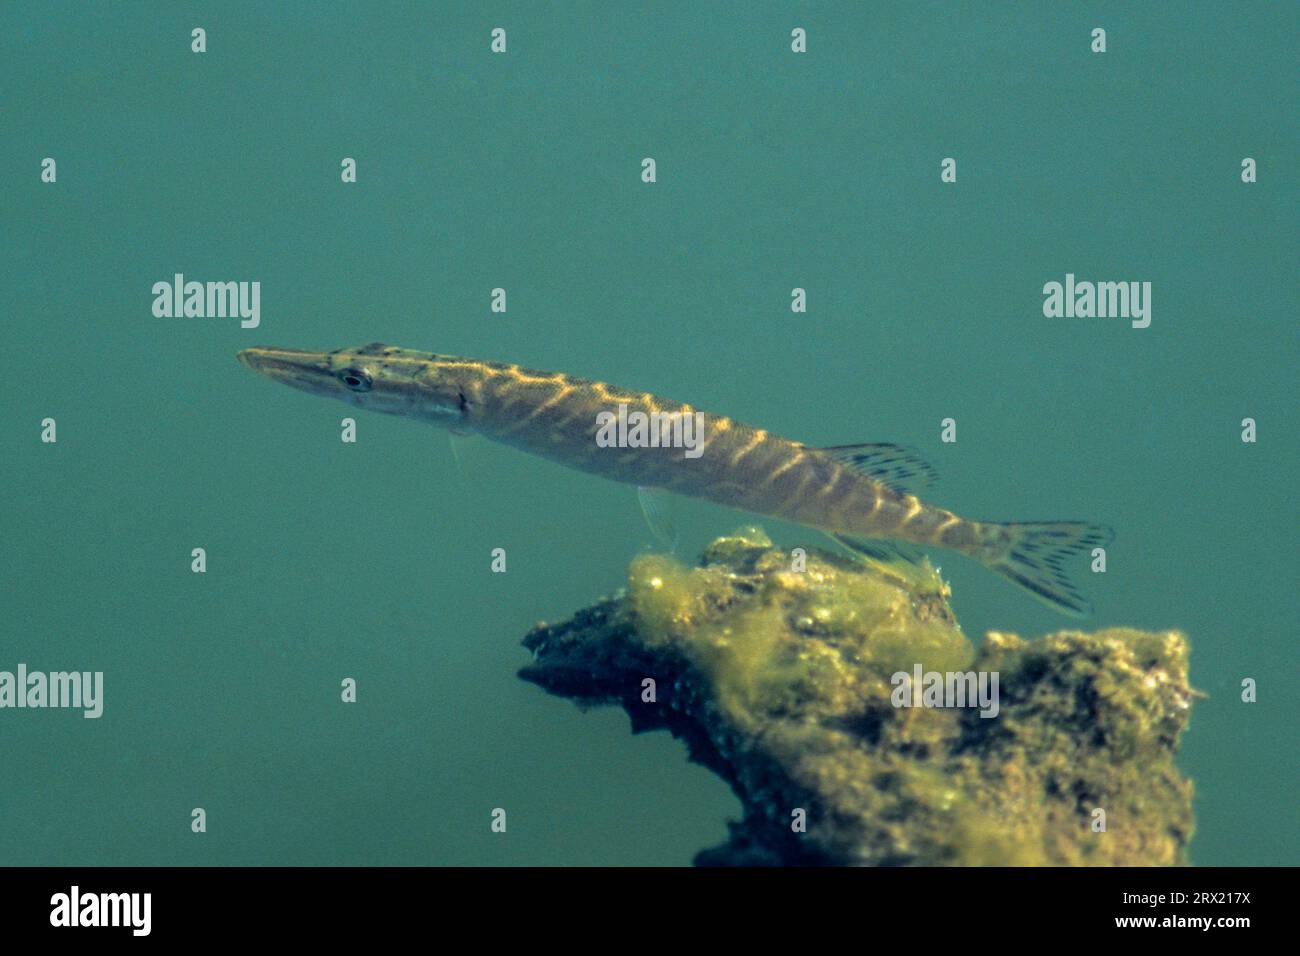 Pike, the largest fish ever recorded was 152cm long and weighed 28kg (European pike) (Photo juvenile fish), Northern Pike (Esox lucius), the largest Stock Photo